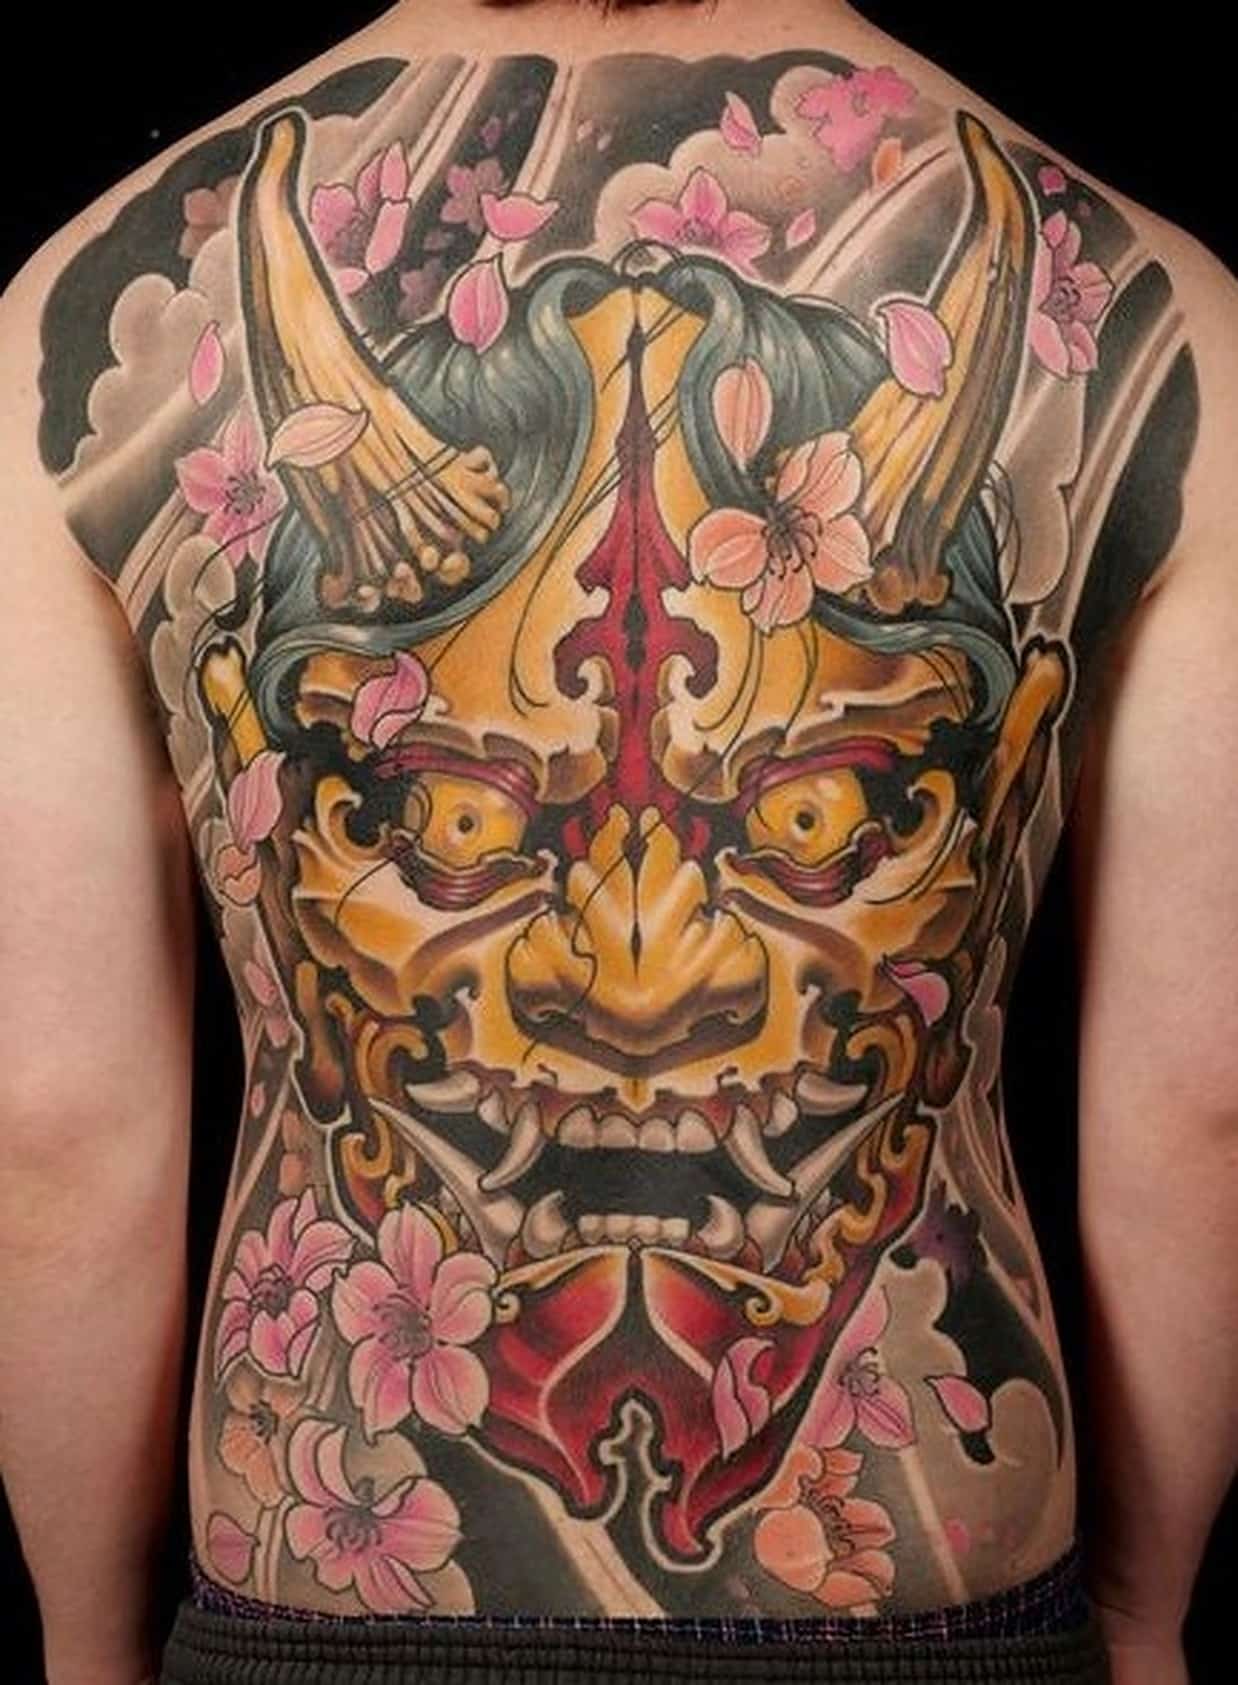 Oni mask tattoo meaning